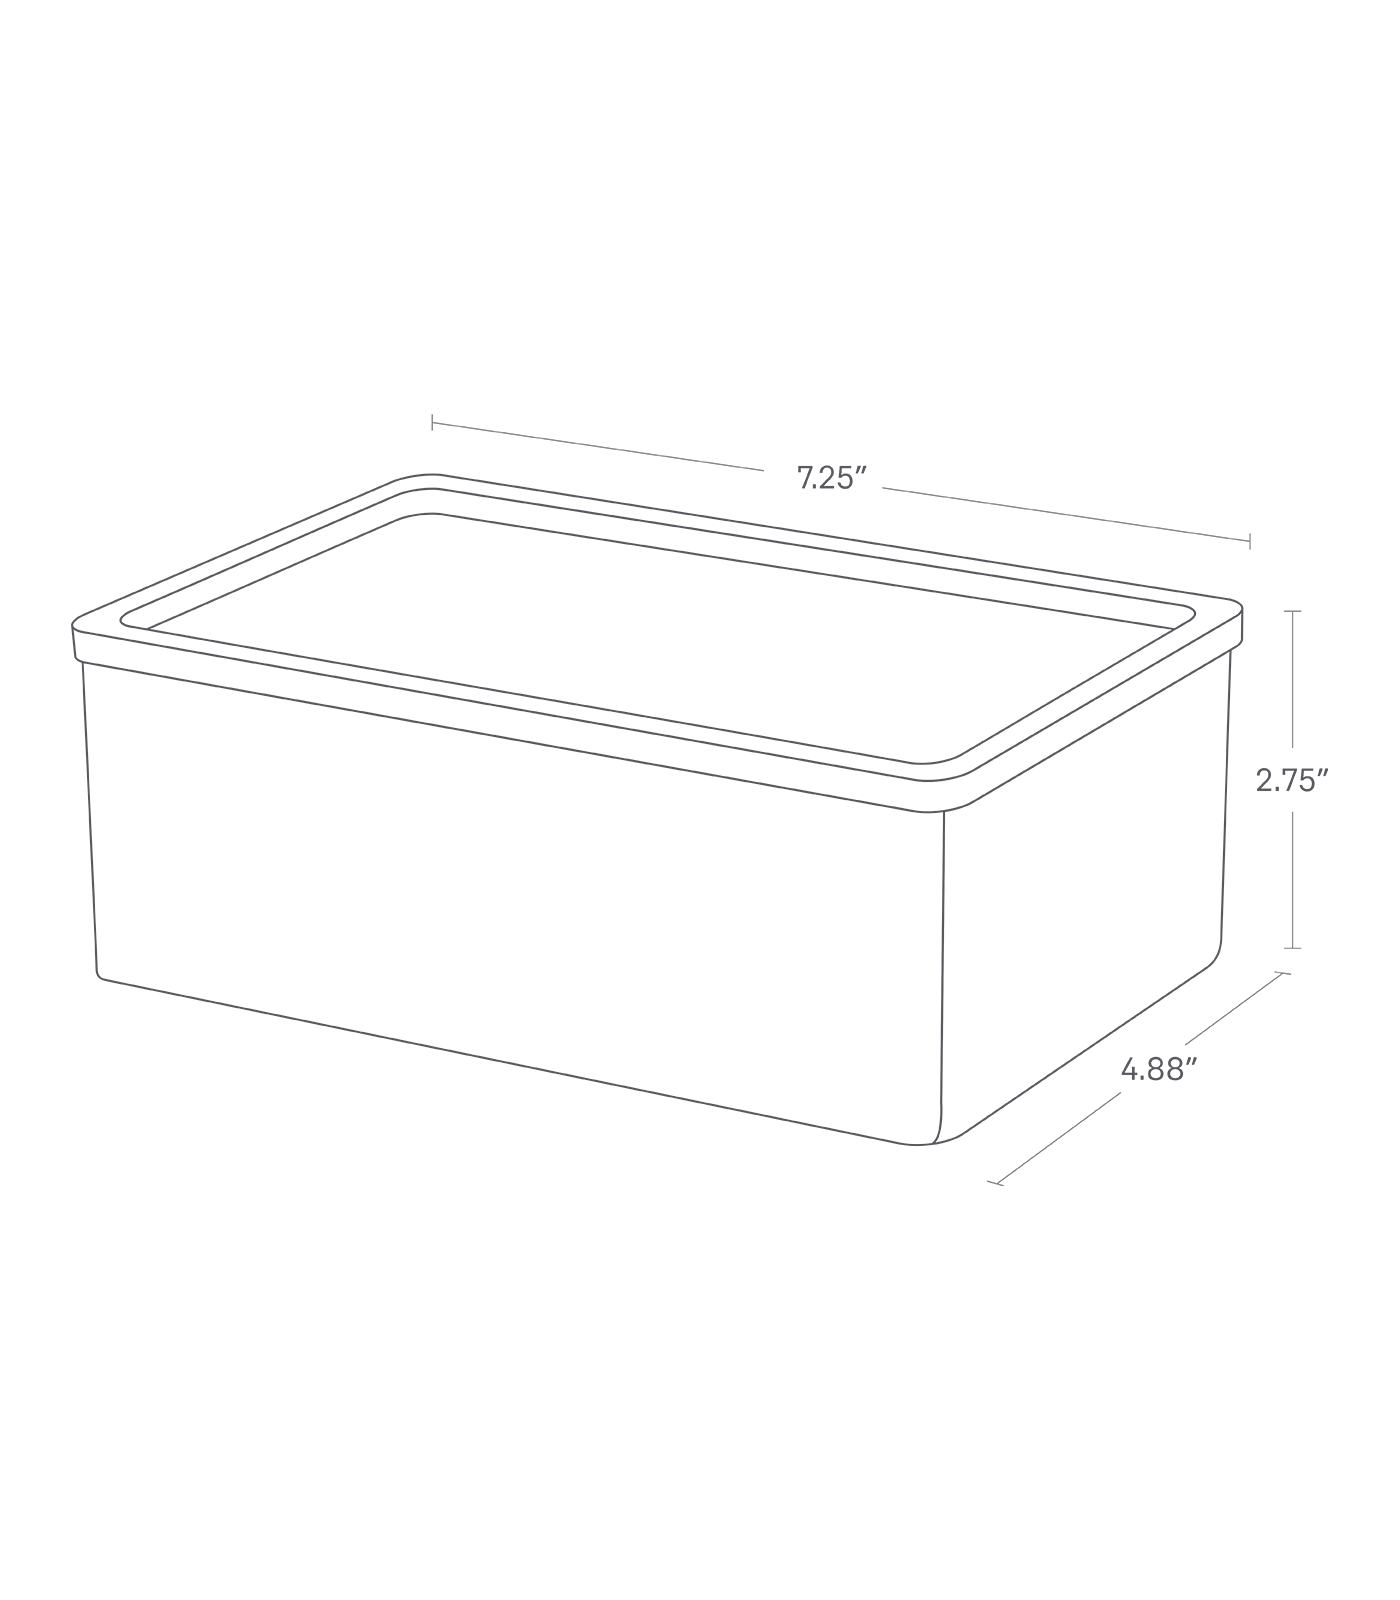 Dimension image for Accessory Box showing a total length of 7.25